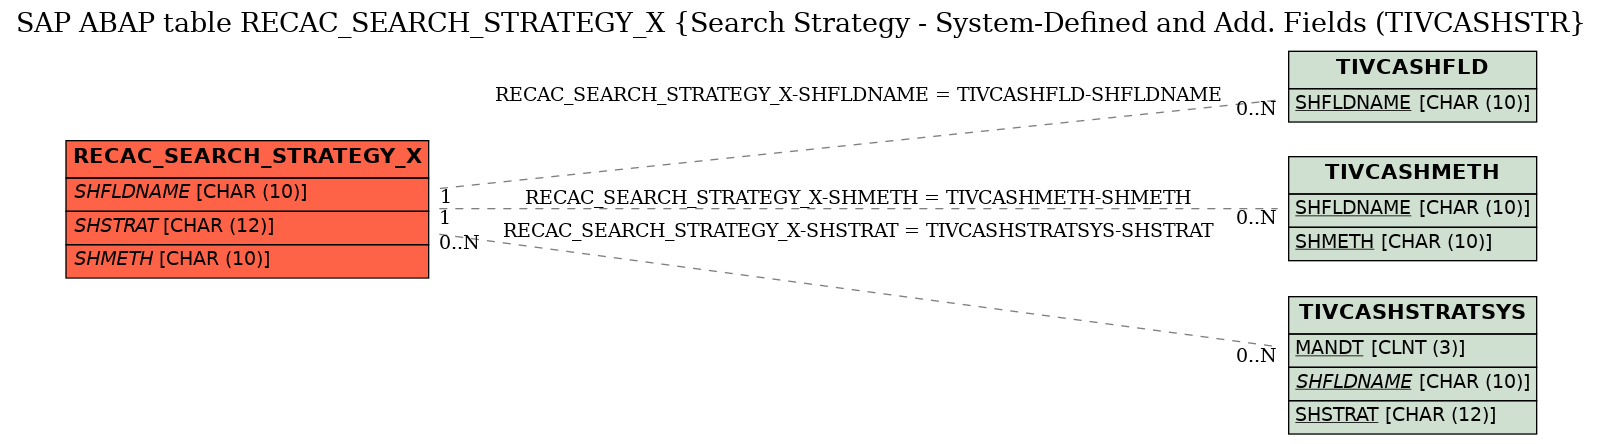 E-R Diagram for table RECAC_SEARCH_STRATEGY_X (Search Strategy - System-Defined and Add. Fields (TIVCASHSTR)